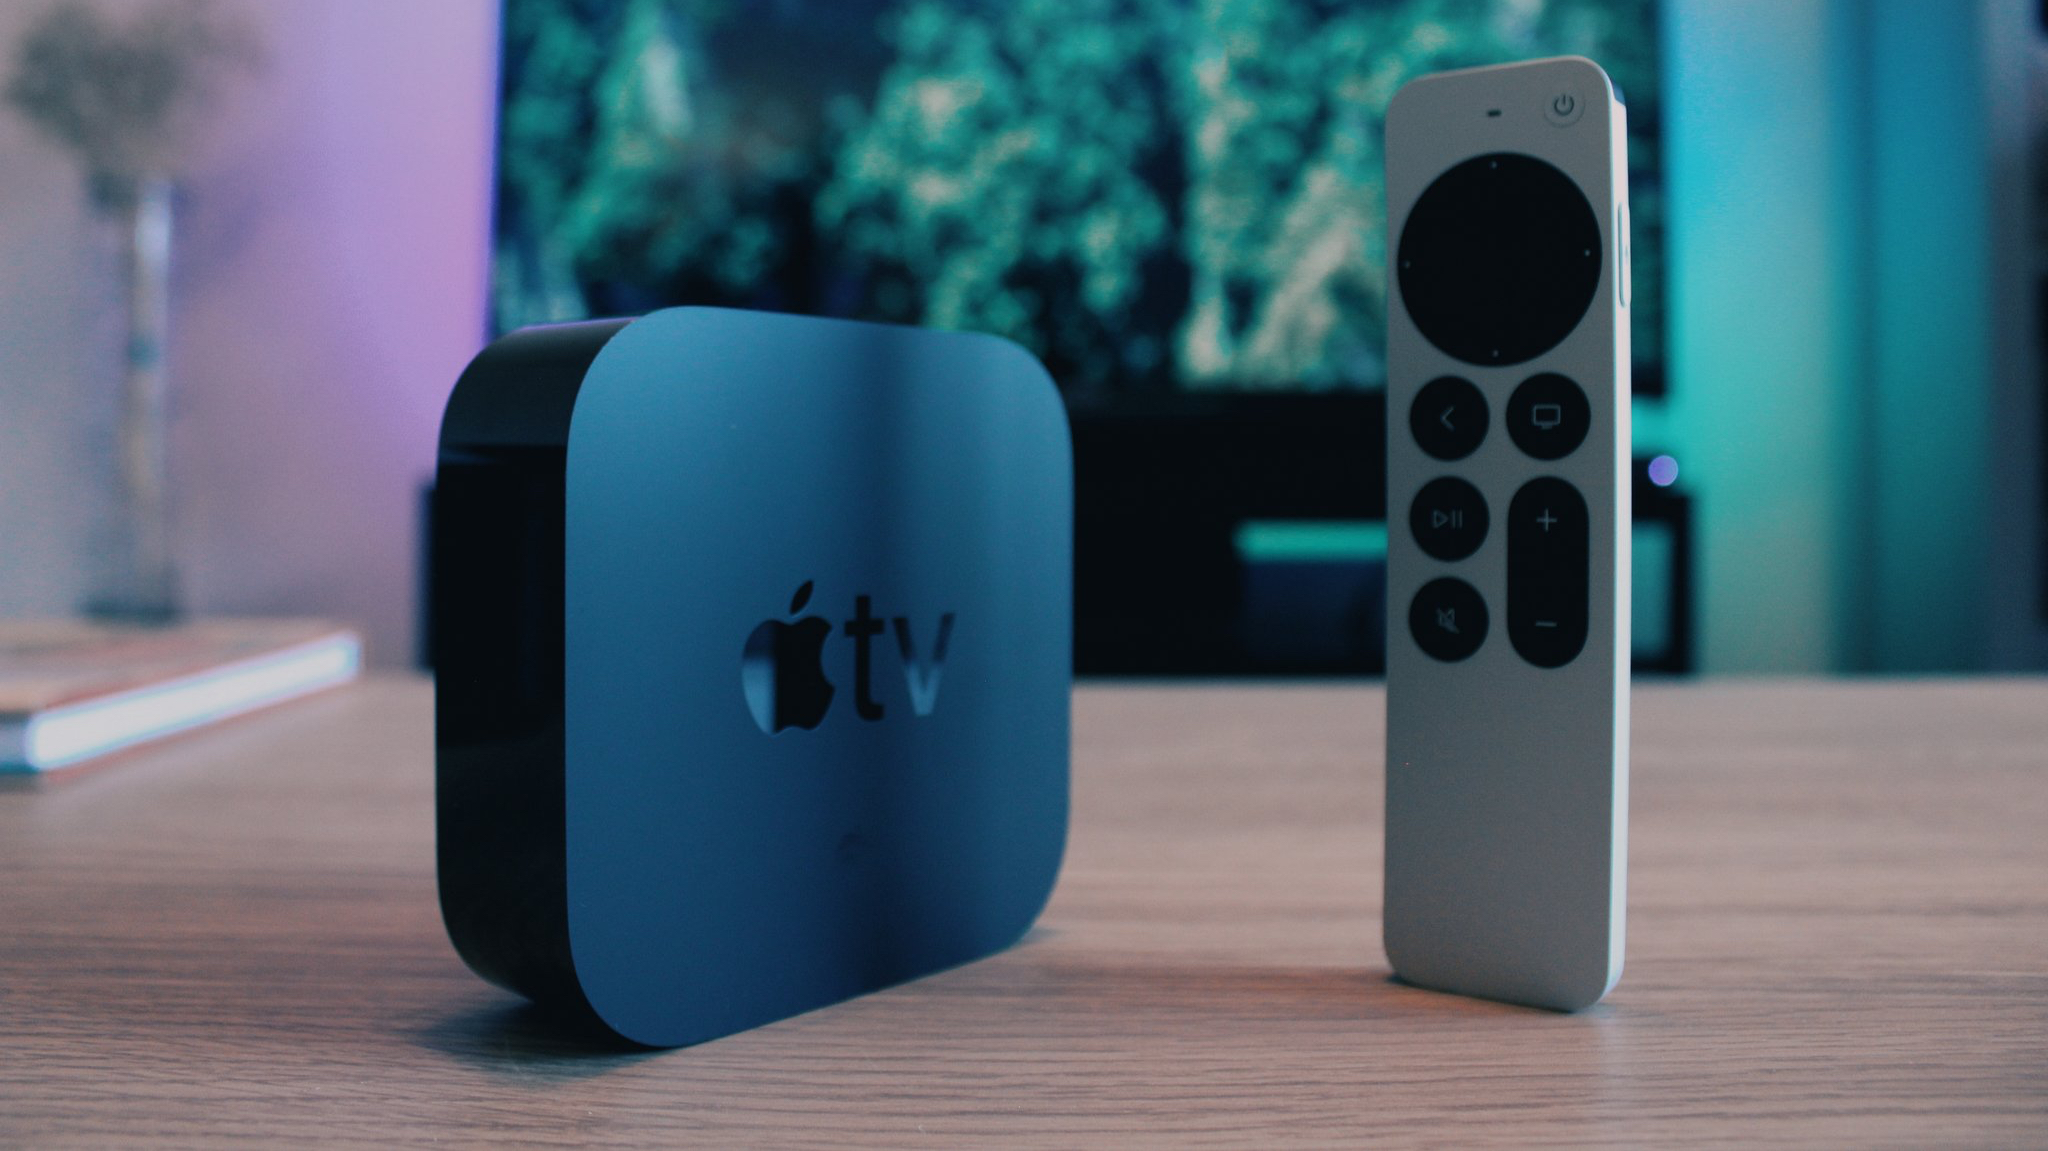 Apple TV 4K with Siri Remote sitting on table